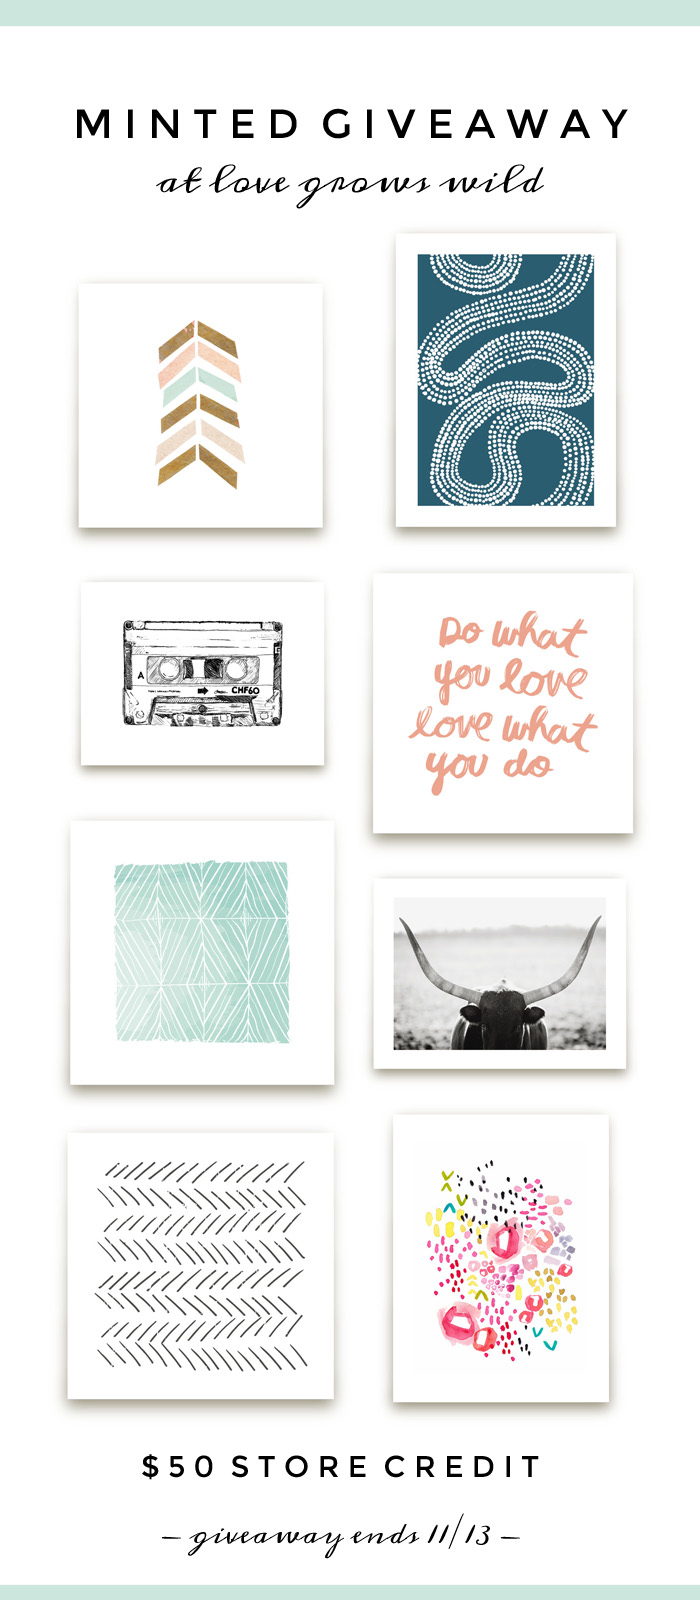 Decorate your home with some new art prints from Minted.com!  Enter to win at LoveGrowsWild.com - Hurry, ends 11/13!